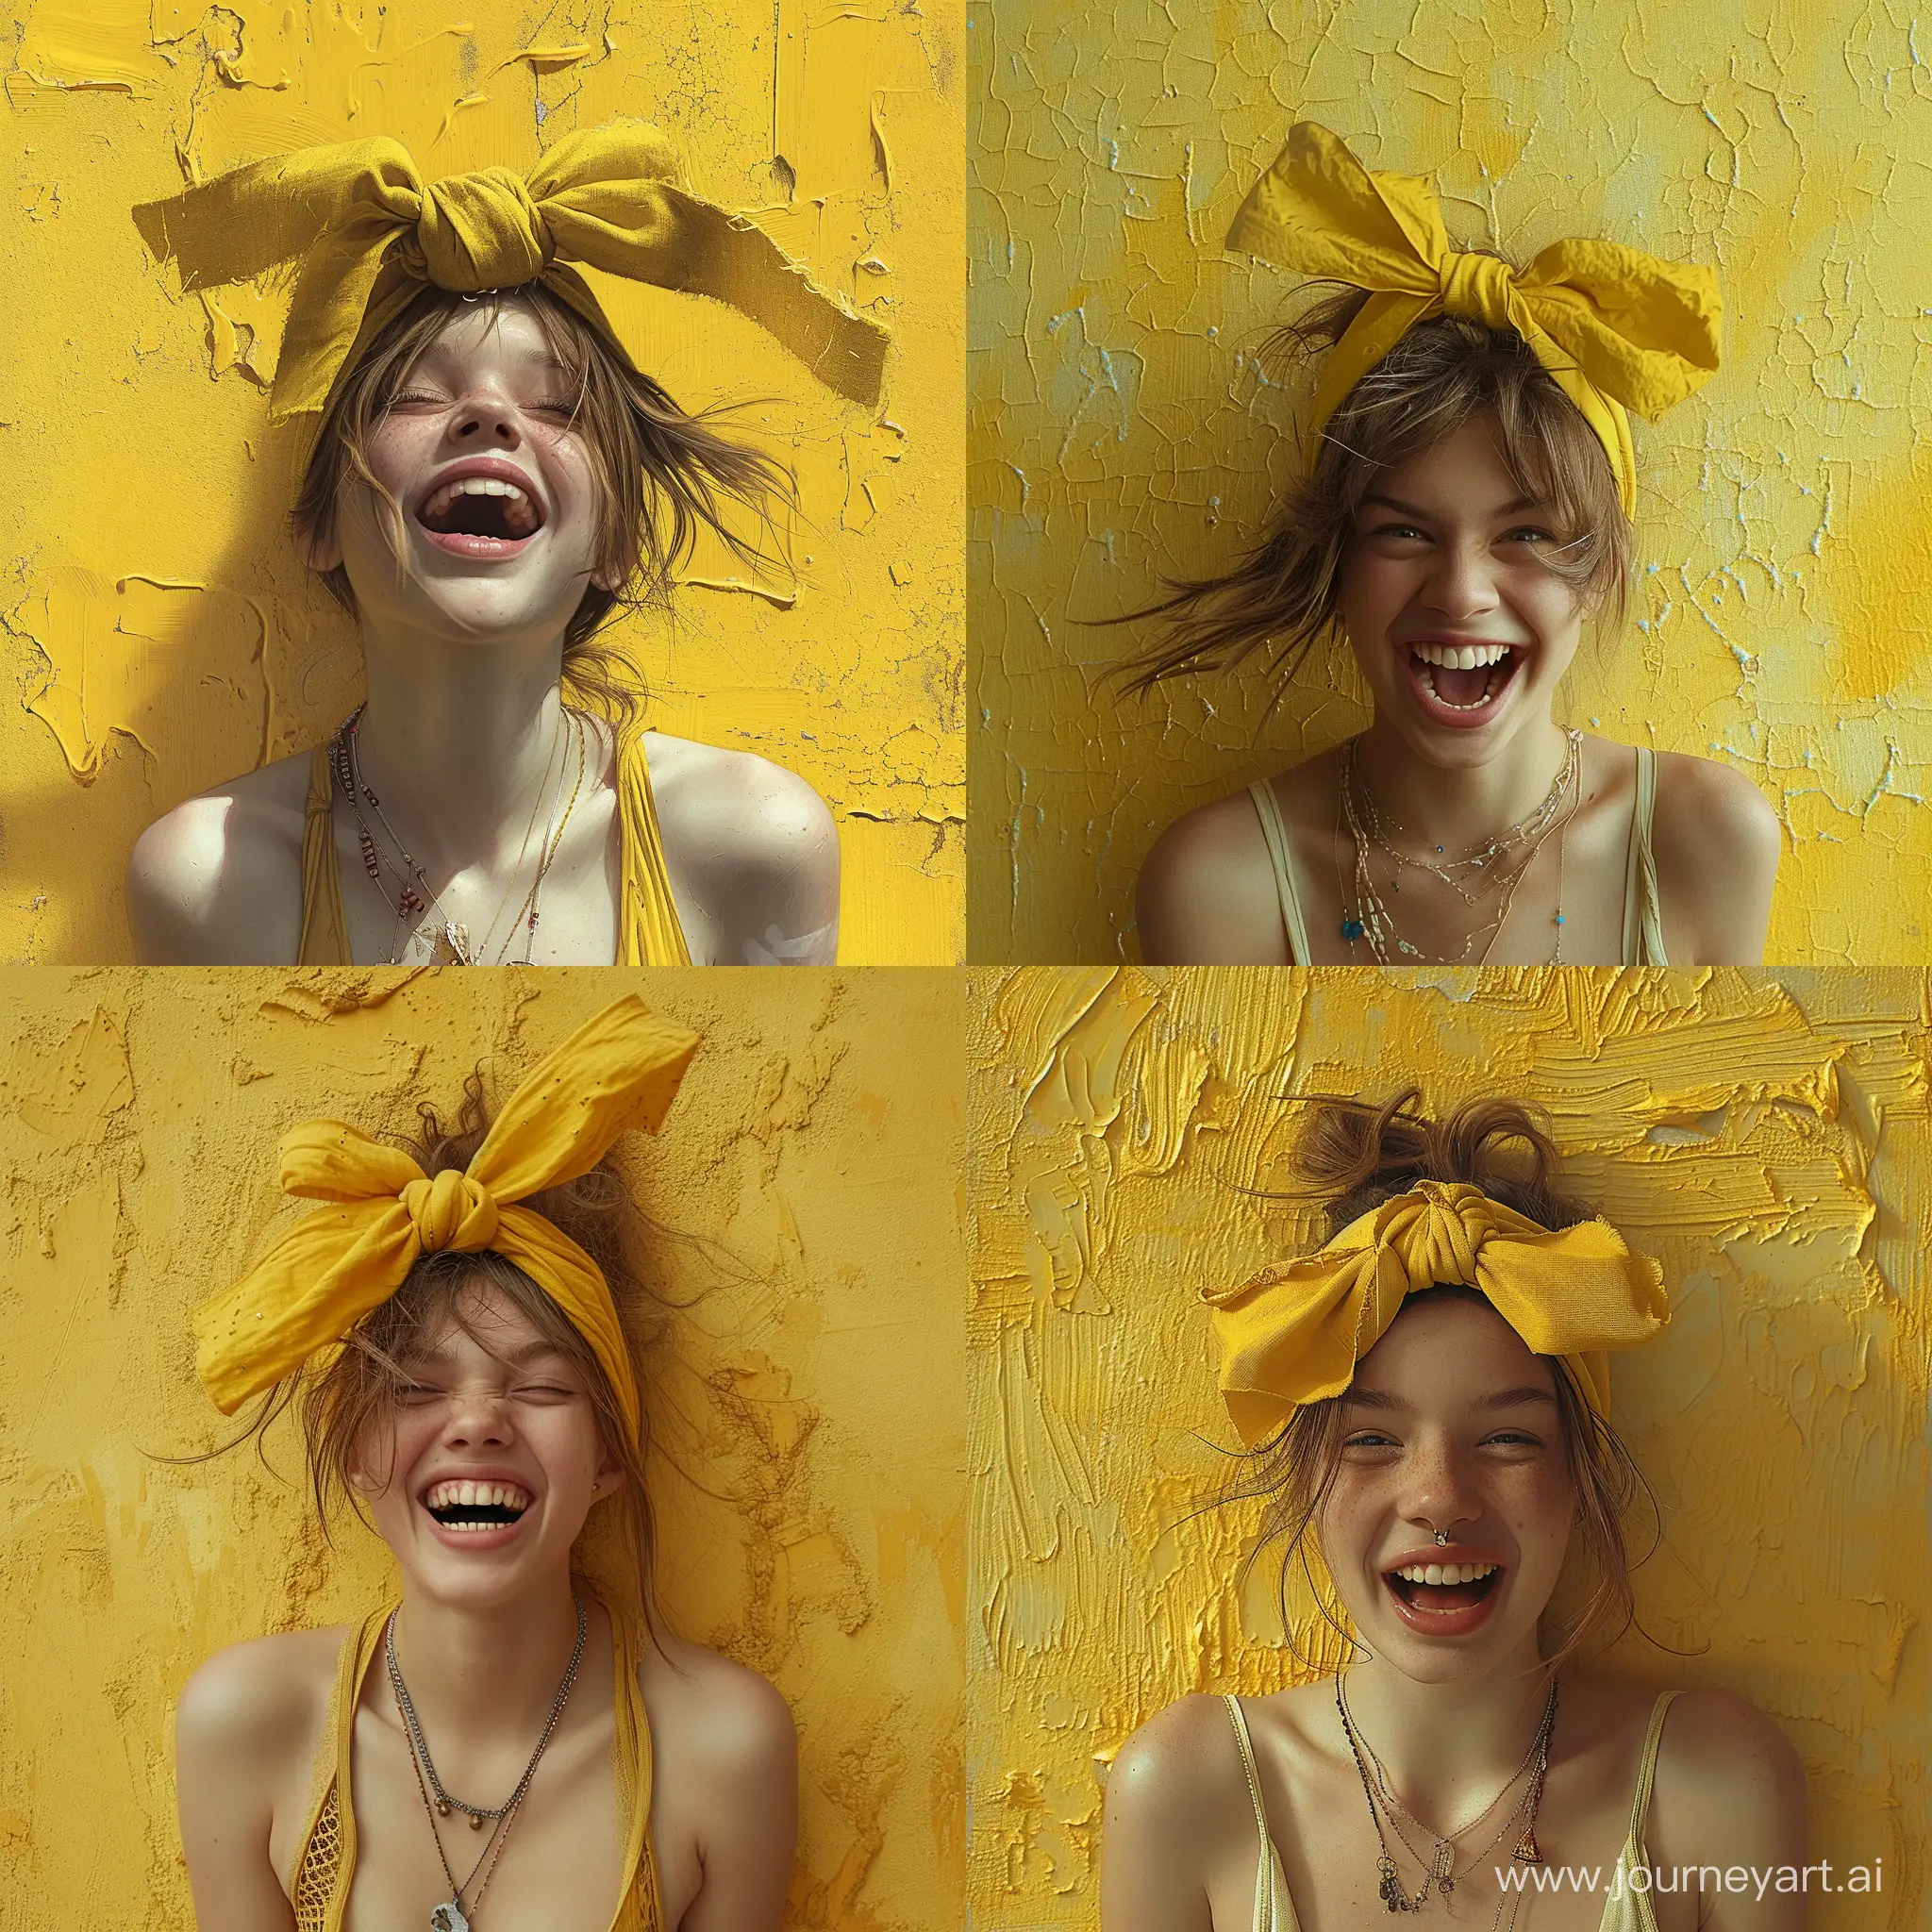 Joyful-Girl-with-Yellow-Bow-Headband-and-Necklaces-on-Textured-Yellow-Background